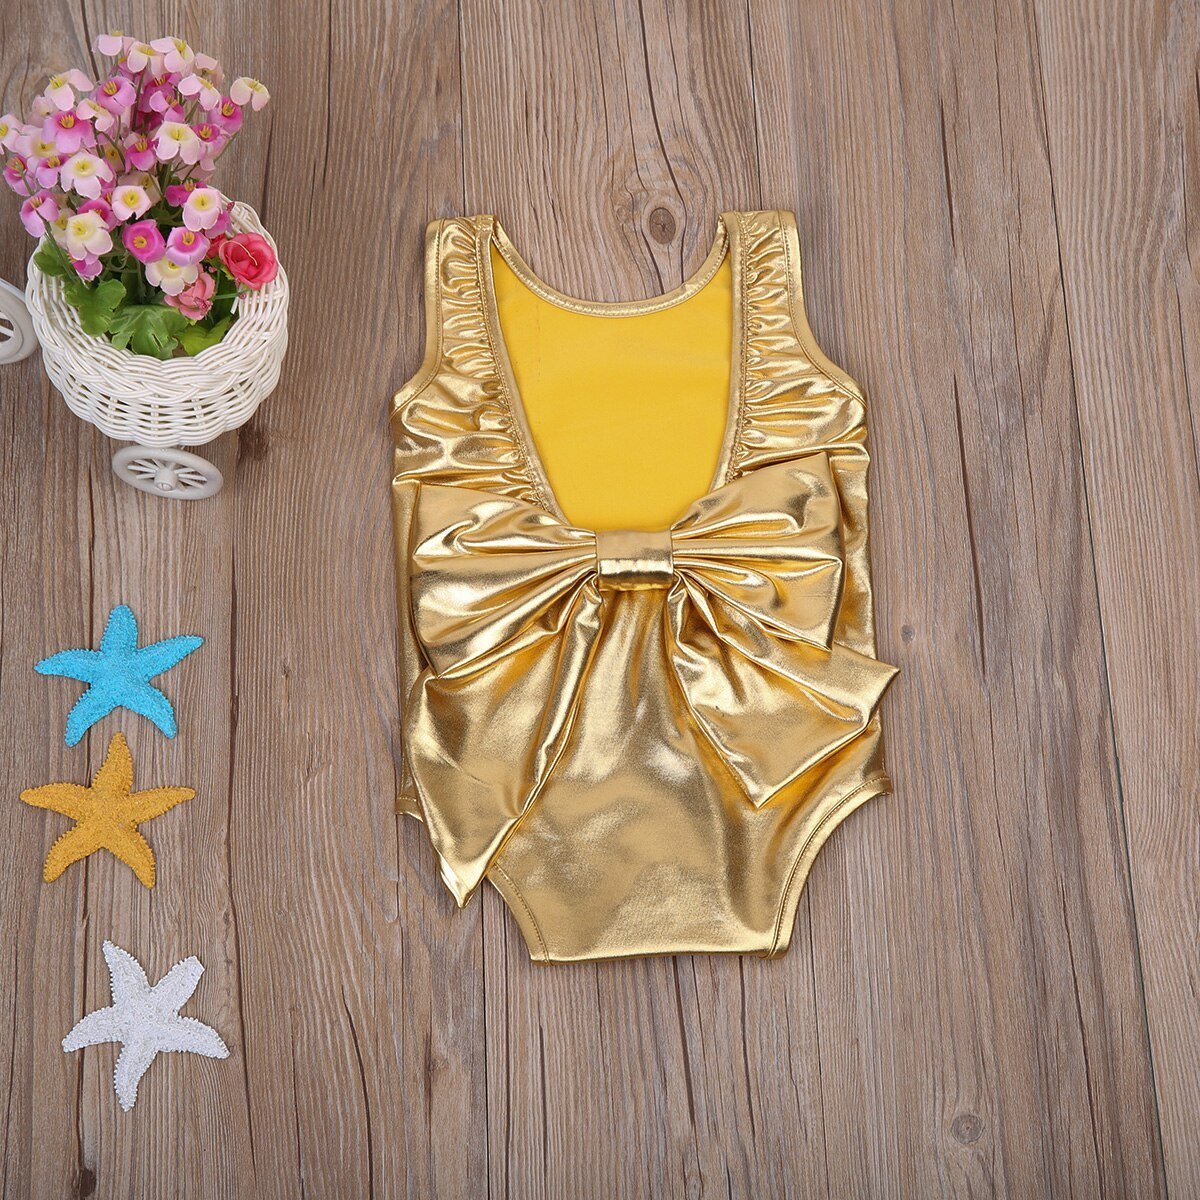 Summer Children Clothing Fashion Infant Baby Girl Back Sleeveless Big Bowknot Bodysuits Outfits Clothes 0-2T - ebowsos